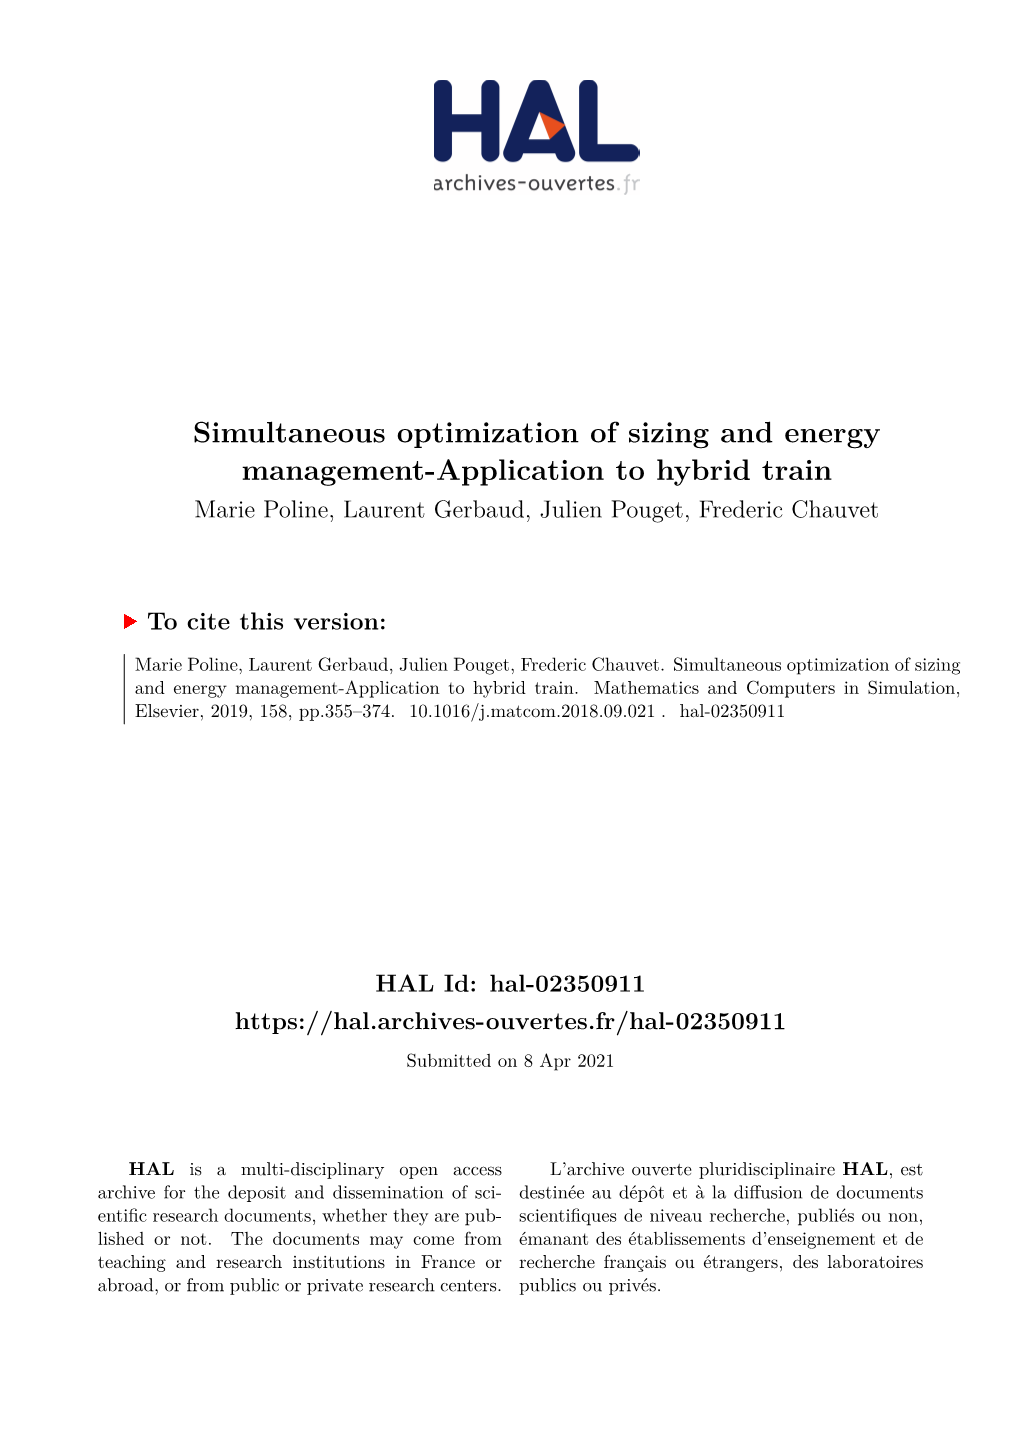 Simultaneous Optimization of Sizing and Energy Management-Application to Hybrid Train Marie Poline, Laurent Gerbaud, Julien Pouget, Frederic Chauvet